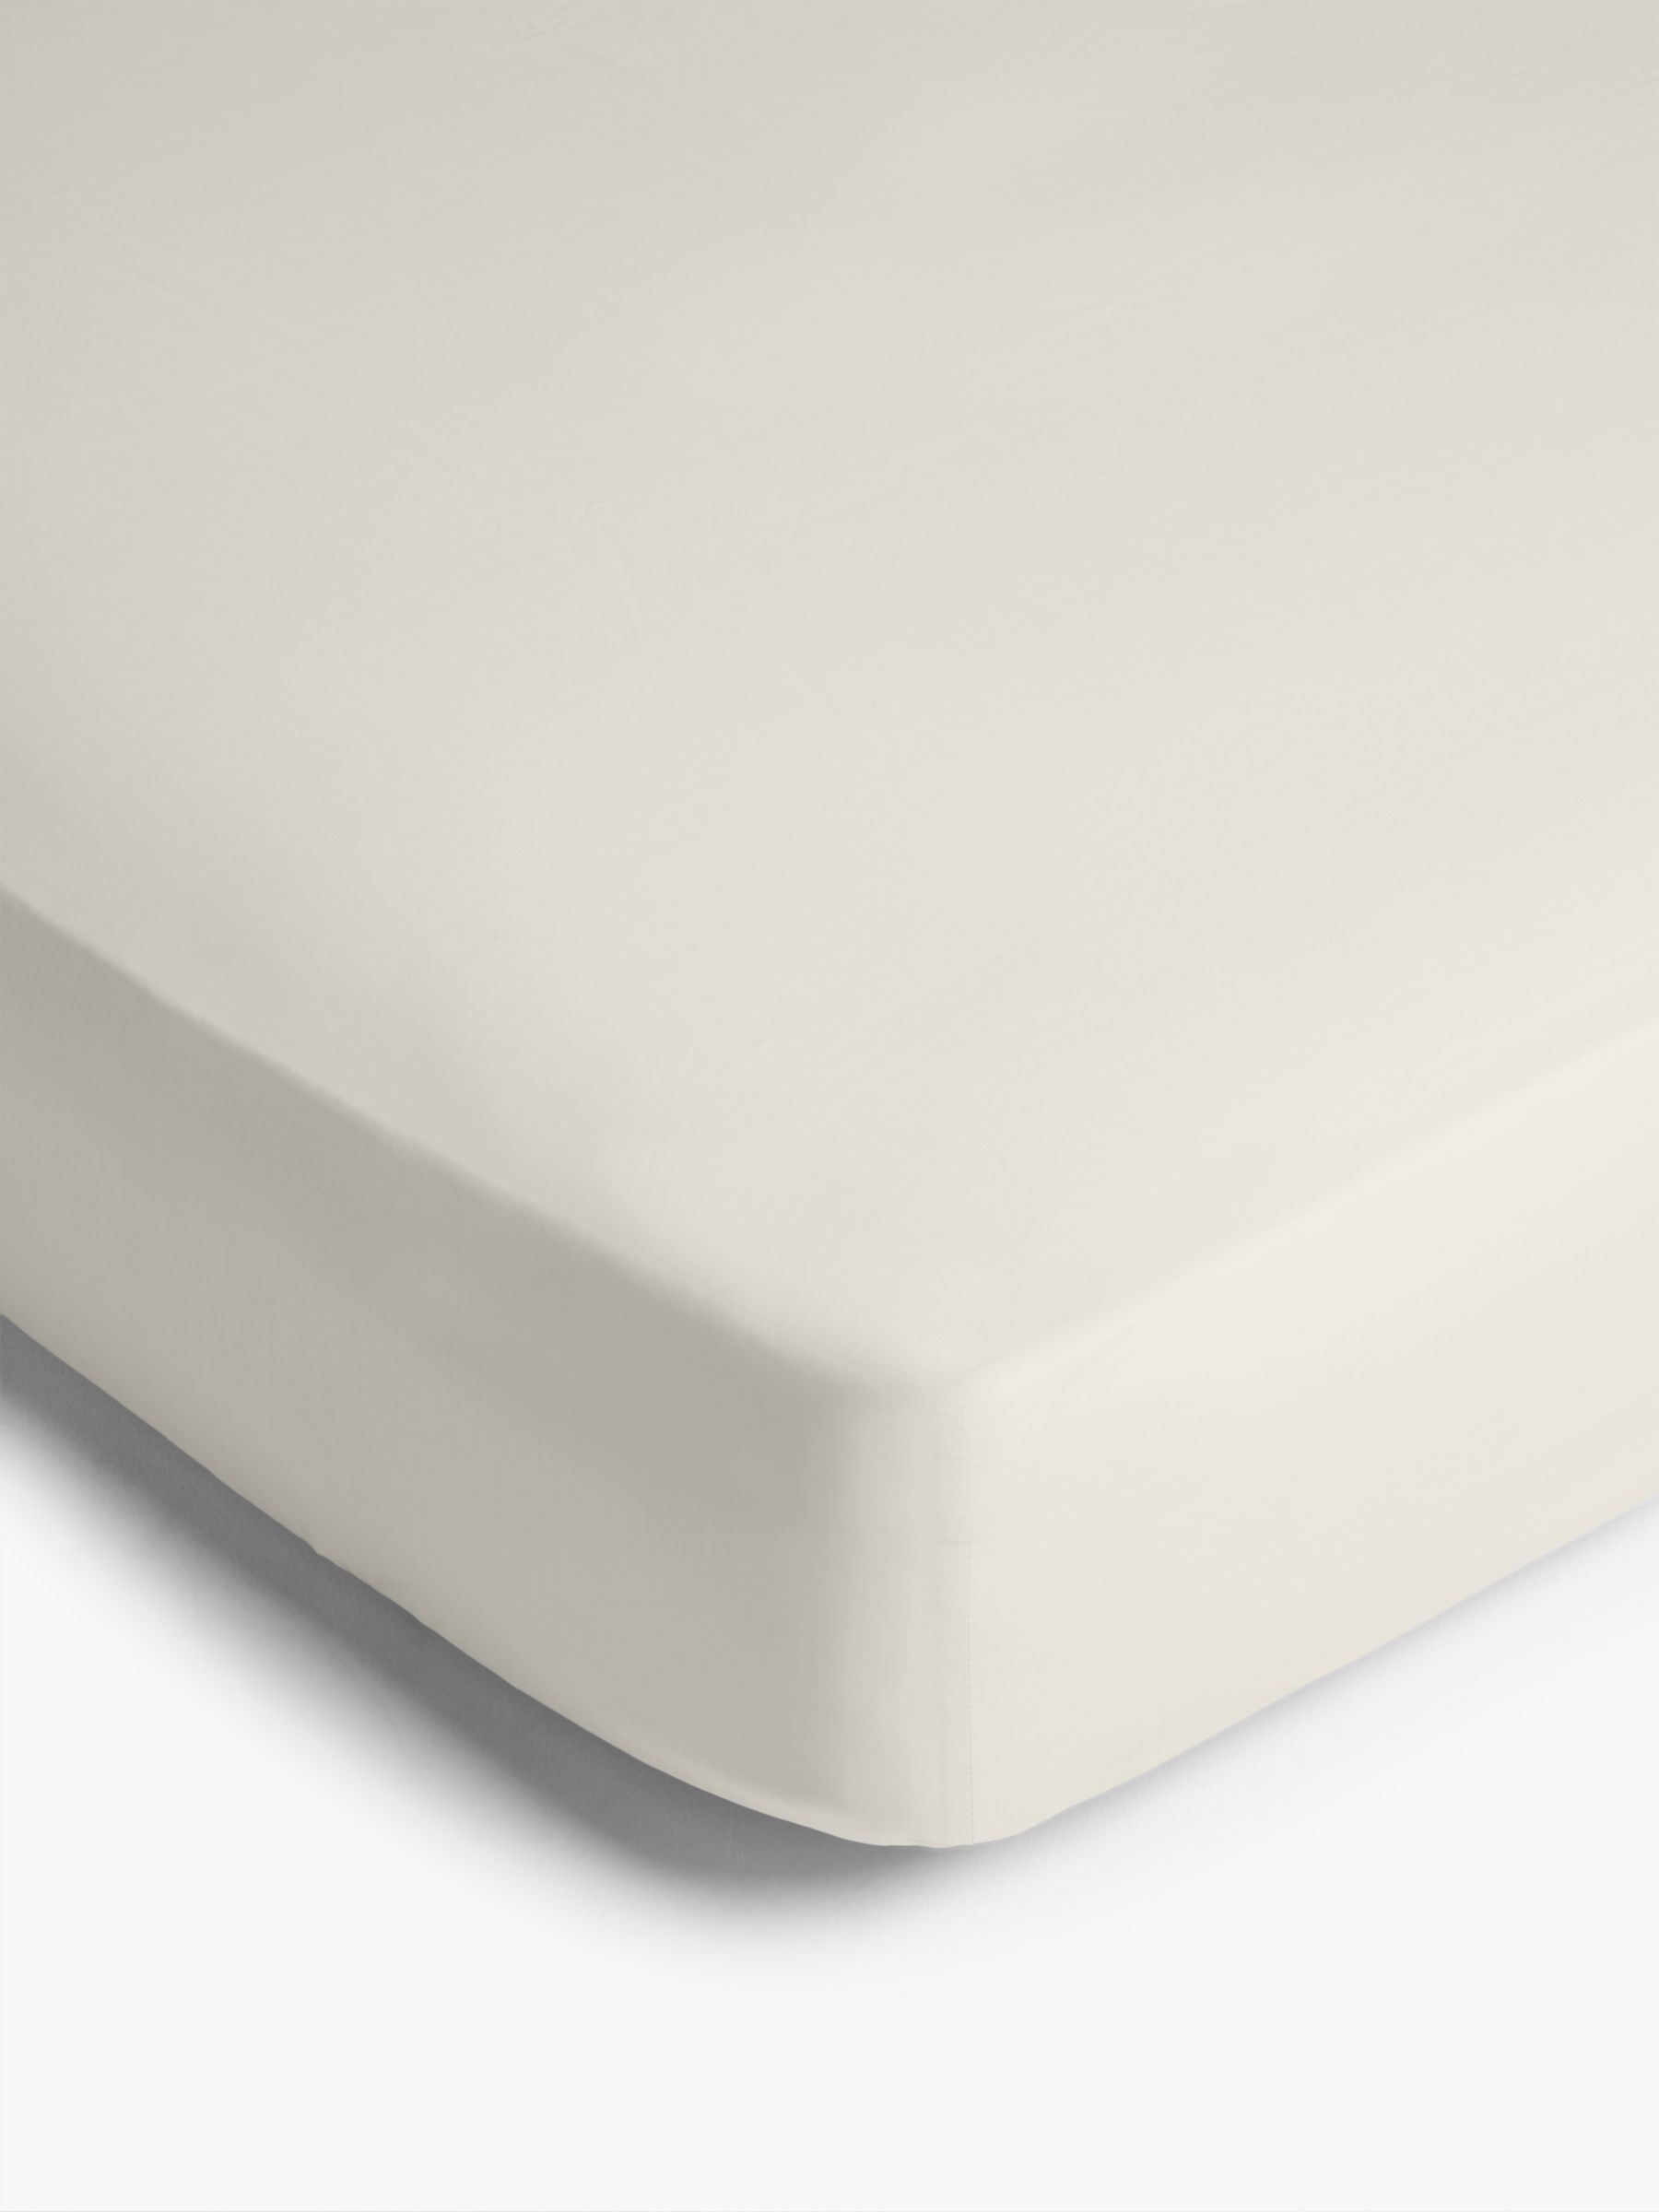 John Lewis & Partners 200 Thread Count Polycotton Standard Fitted Sheet